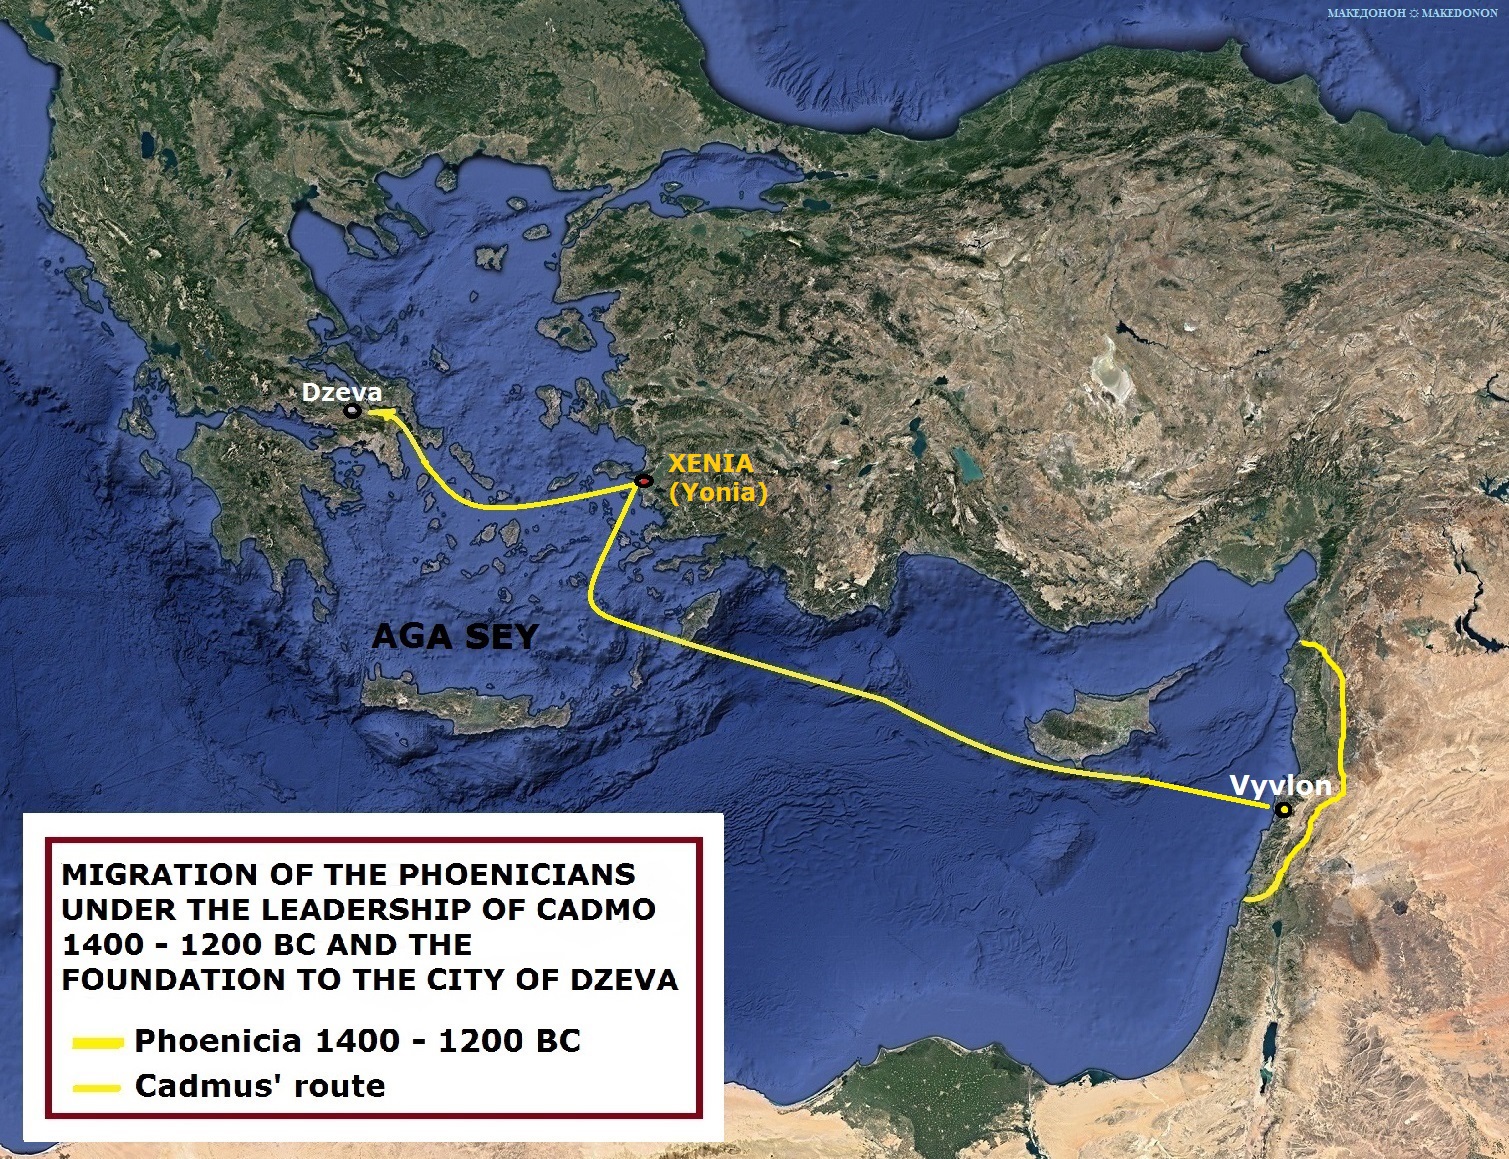 MIGRATION OF THE PHOENICIANS UNDER THE LEADERSHIP OF CADMO 1400 - 1200 BC AND THE FOUNDATION TO THE CITY OF DZEVA